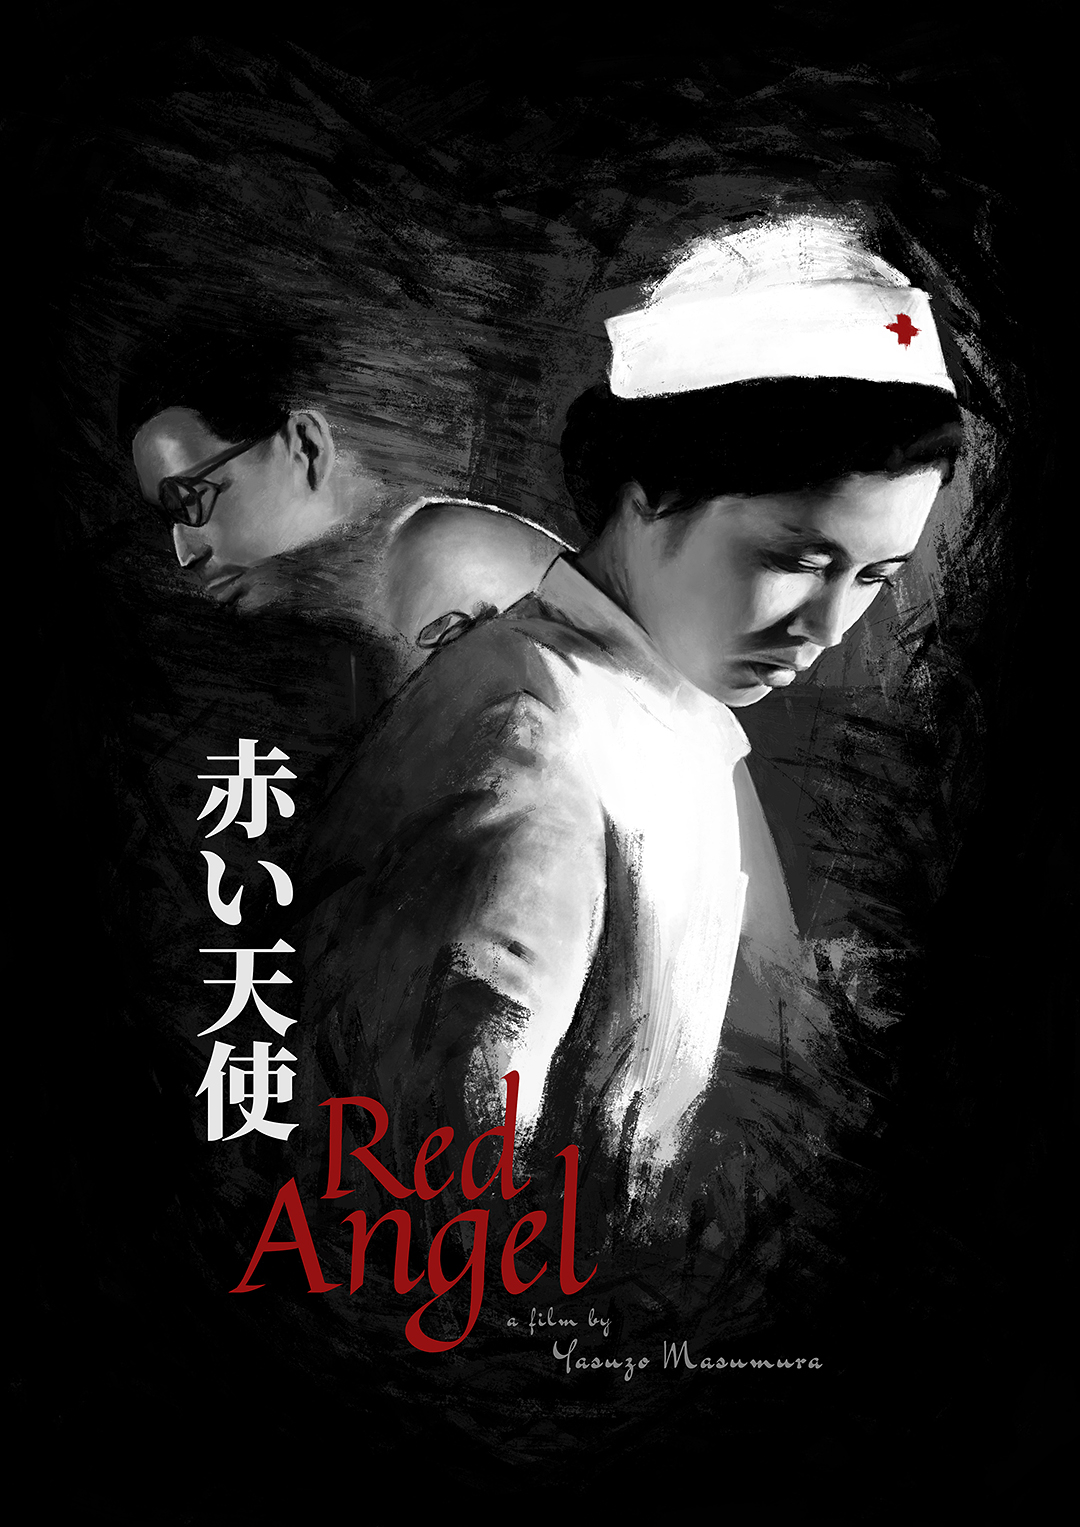 Red Angel by C.R. Daems